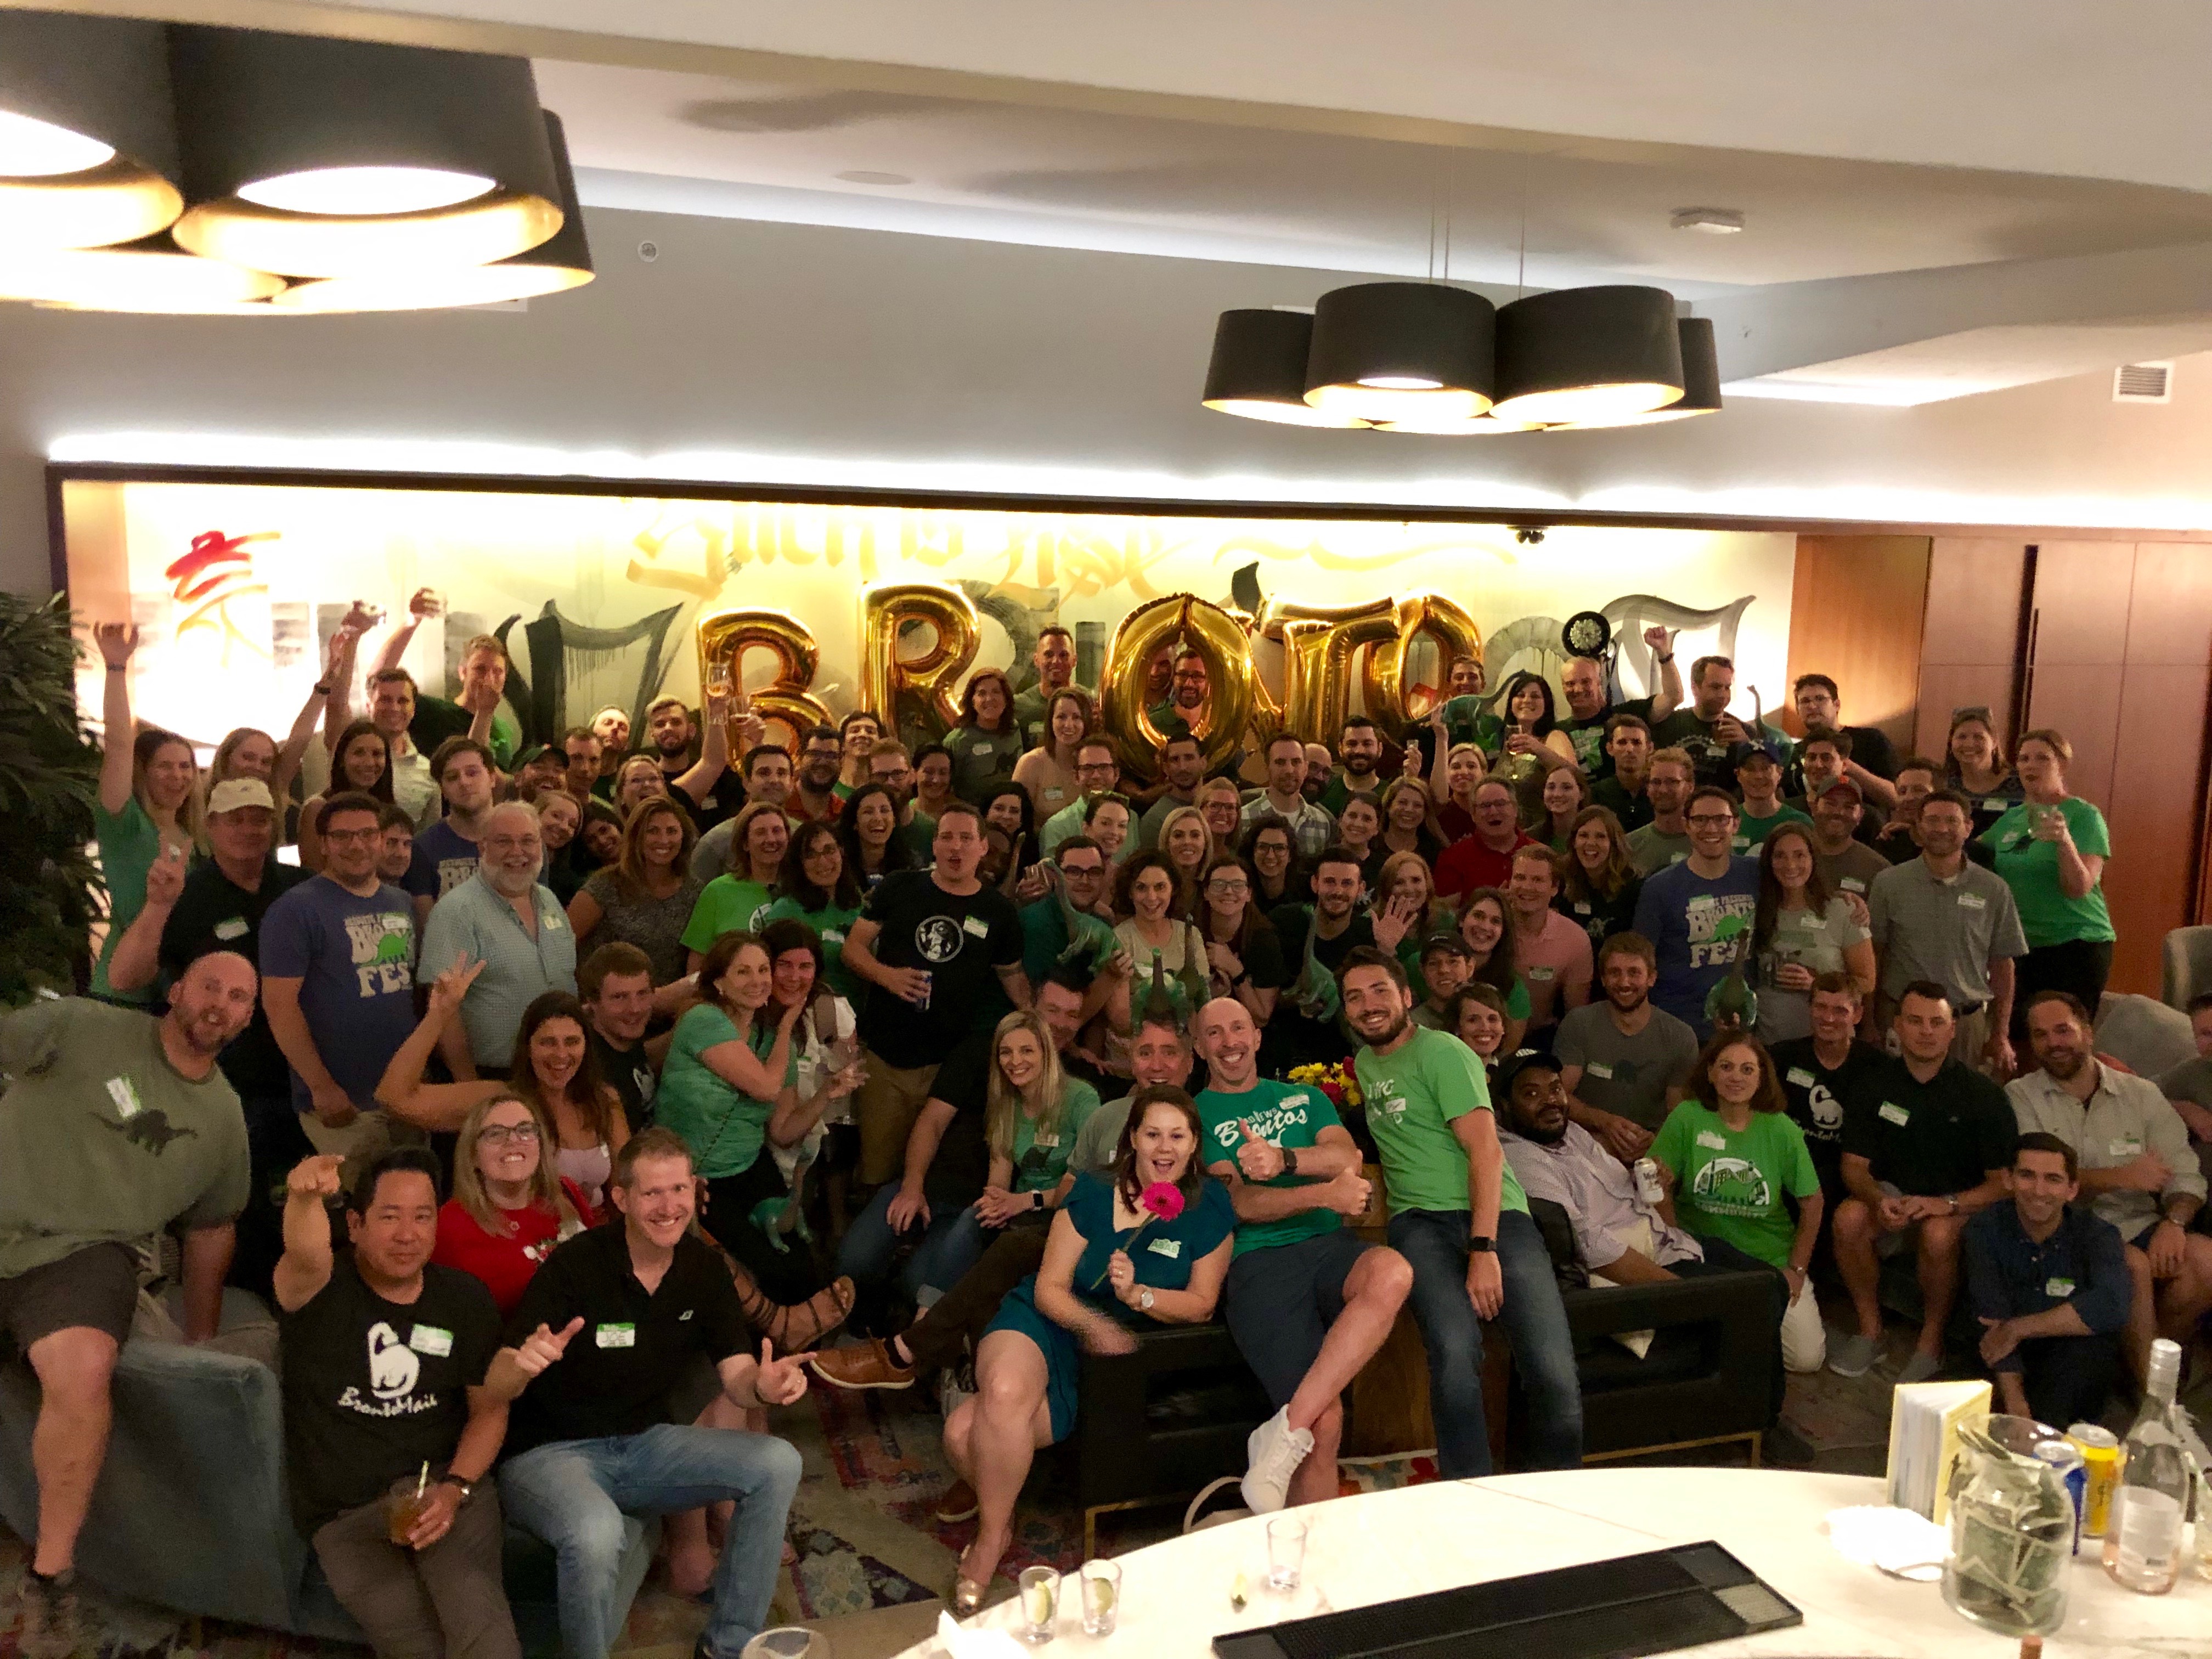 Bronto Reunion … Oh, What a Night!